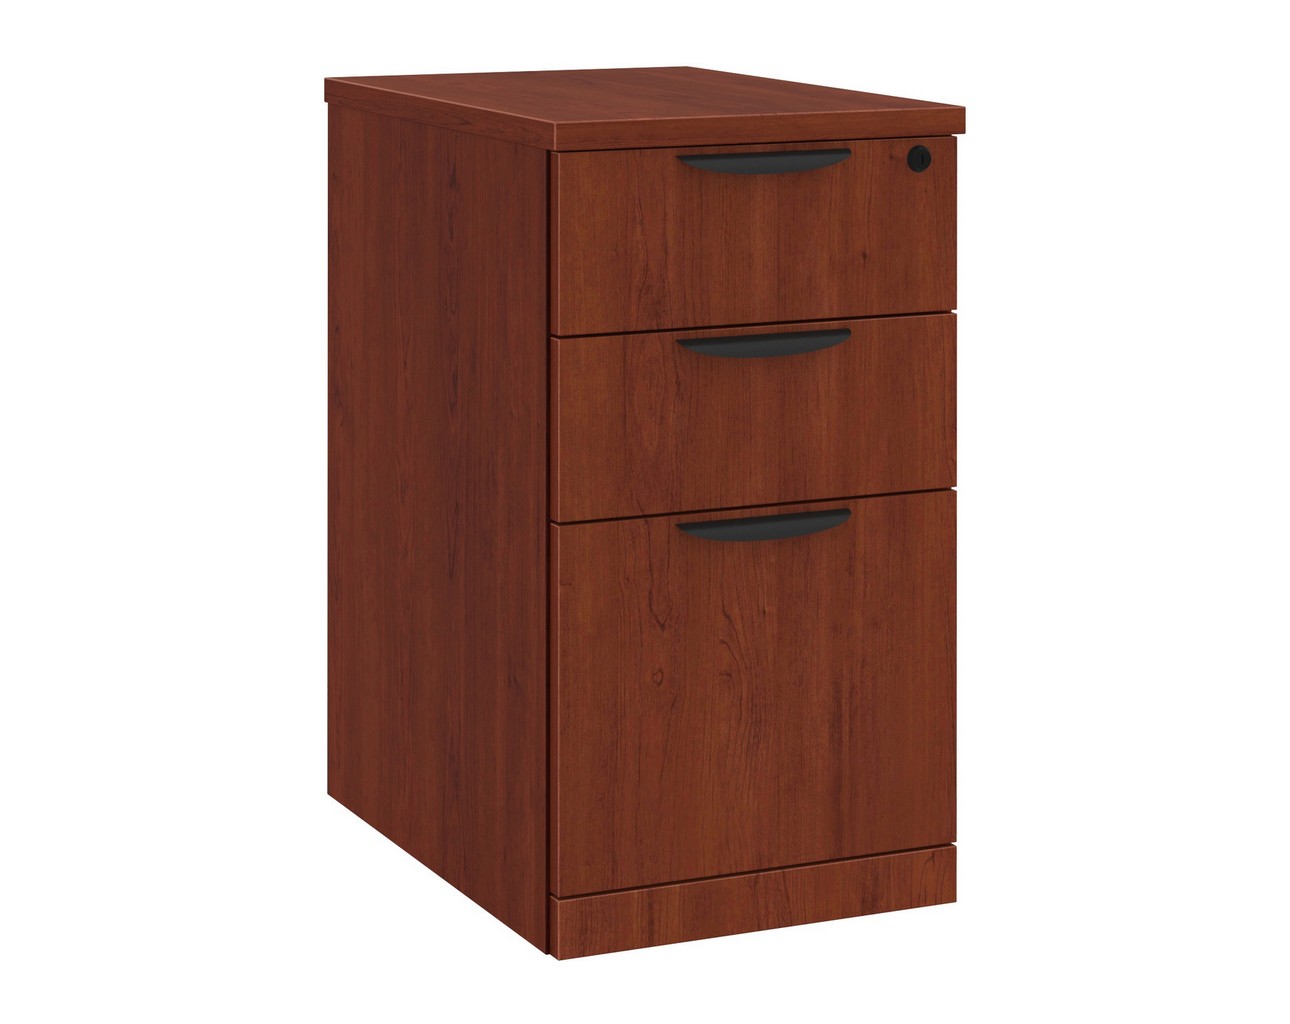 Classic Locking Mobile Pedestals – 3 Drawer in Cherry